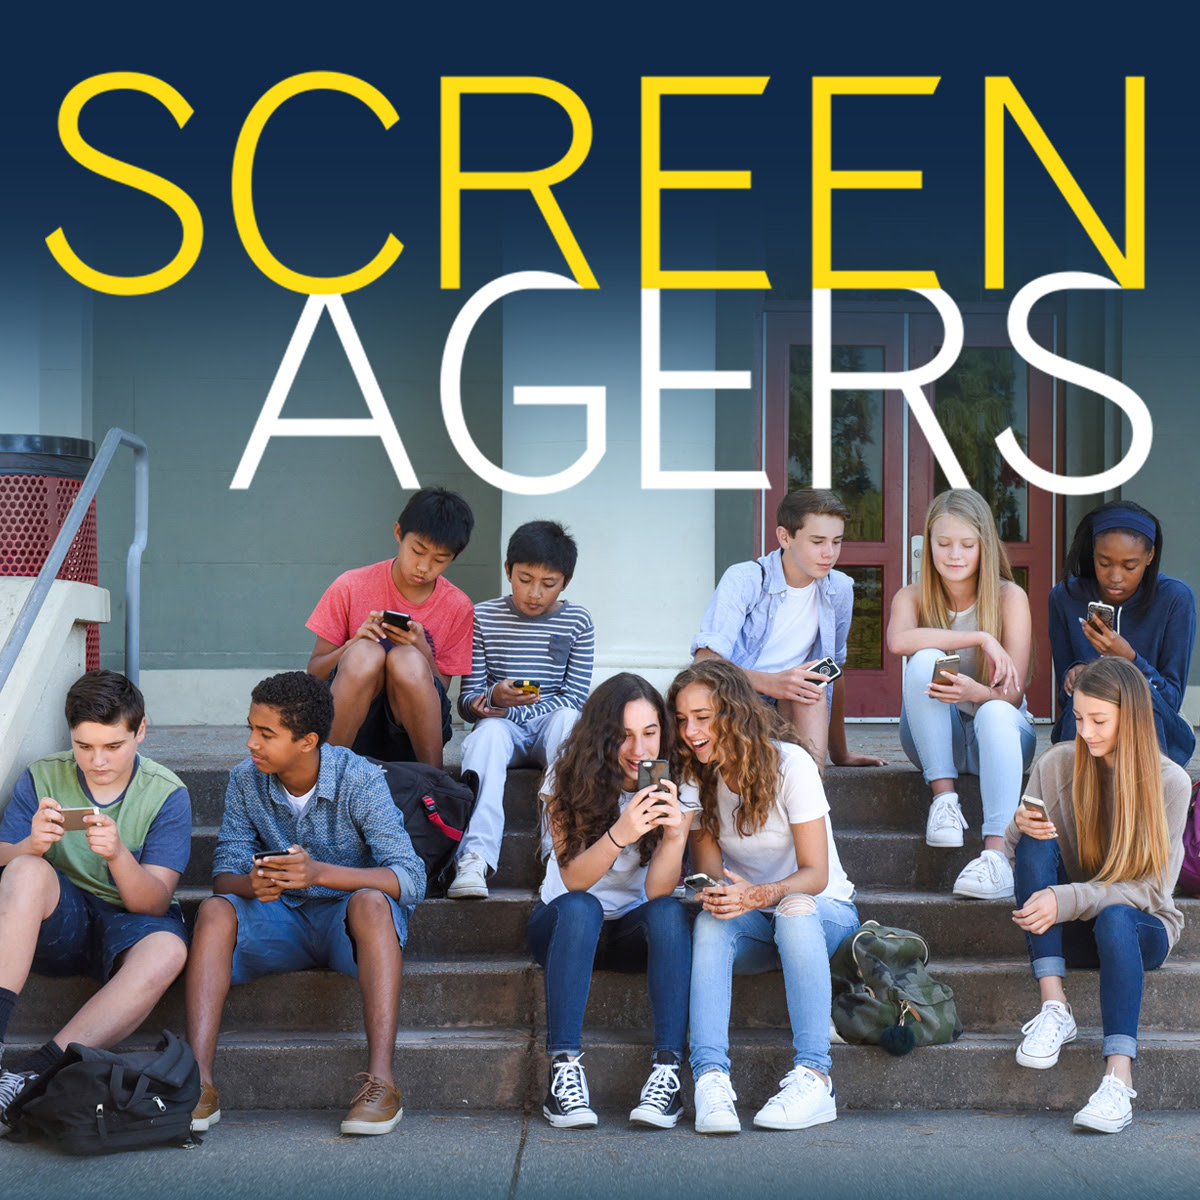 Screenagers Film Presented By Valley Elementary